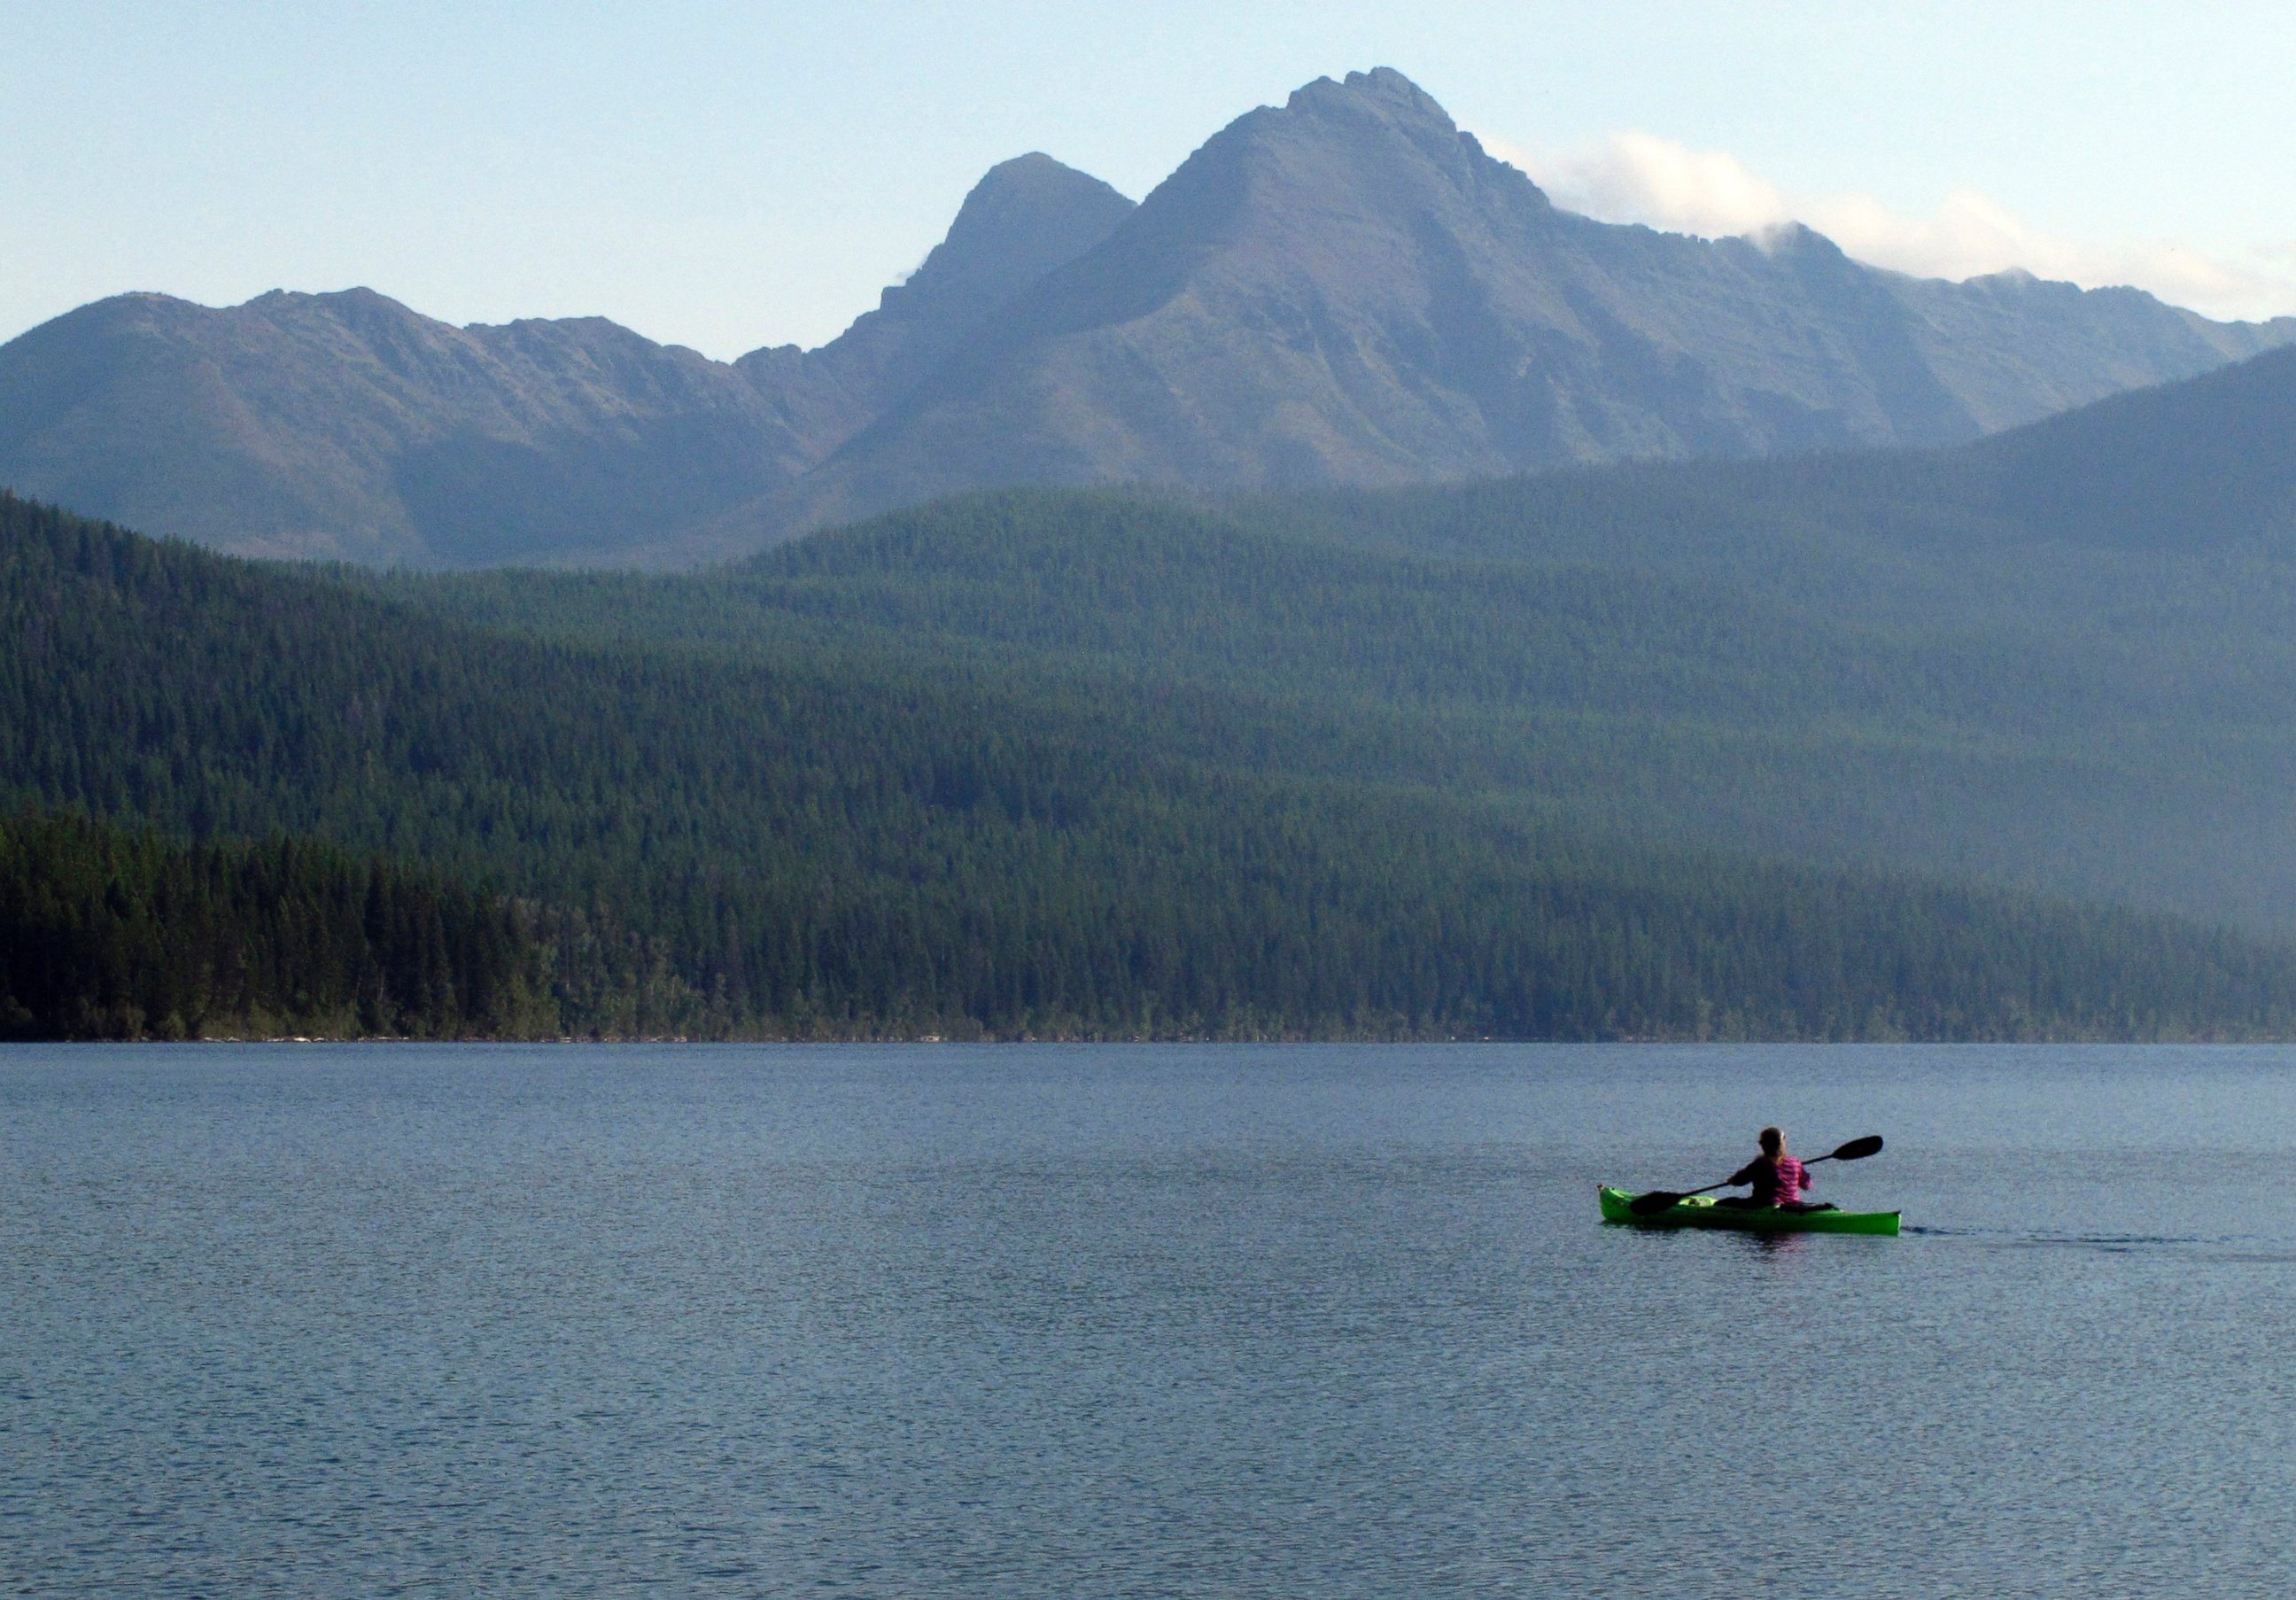 PHOTO: In this Sept. 6, 2013, file photo, a woman kayaks on Kintla Lake in Glacier National Park, Montana.